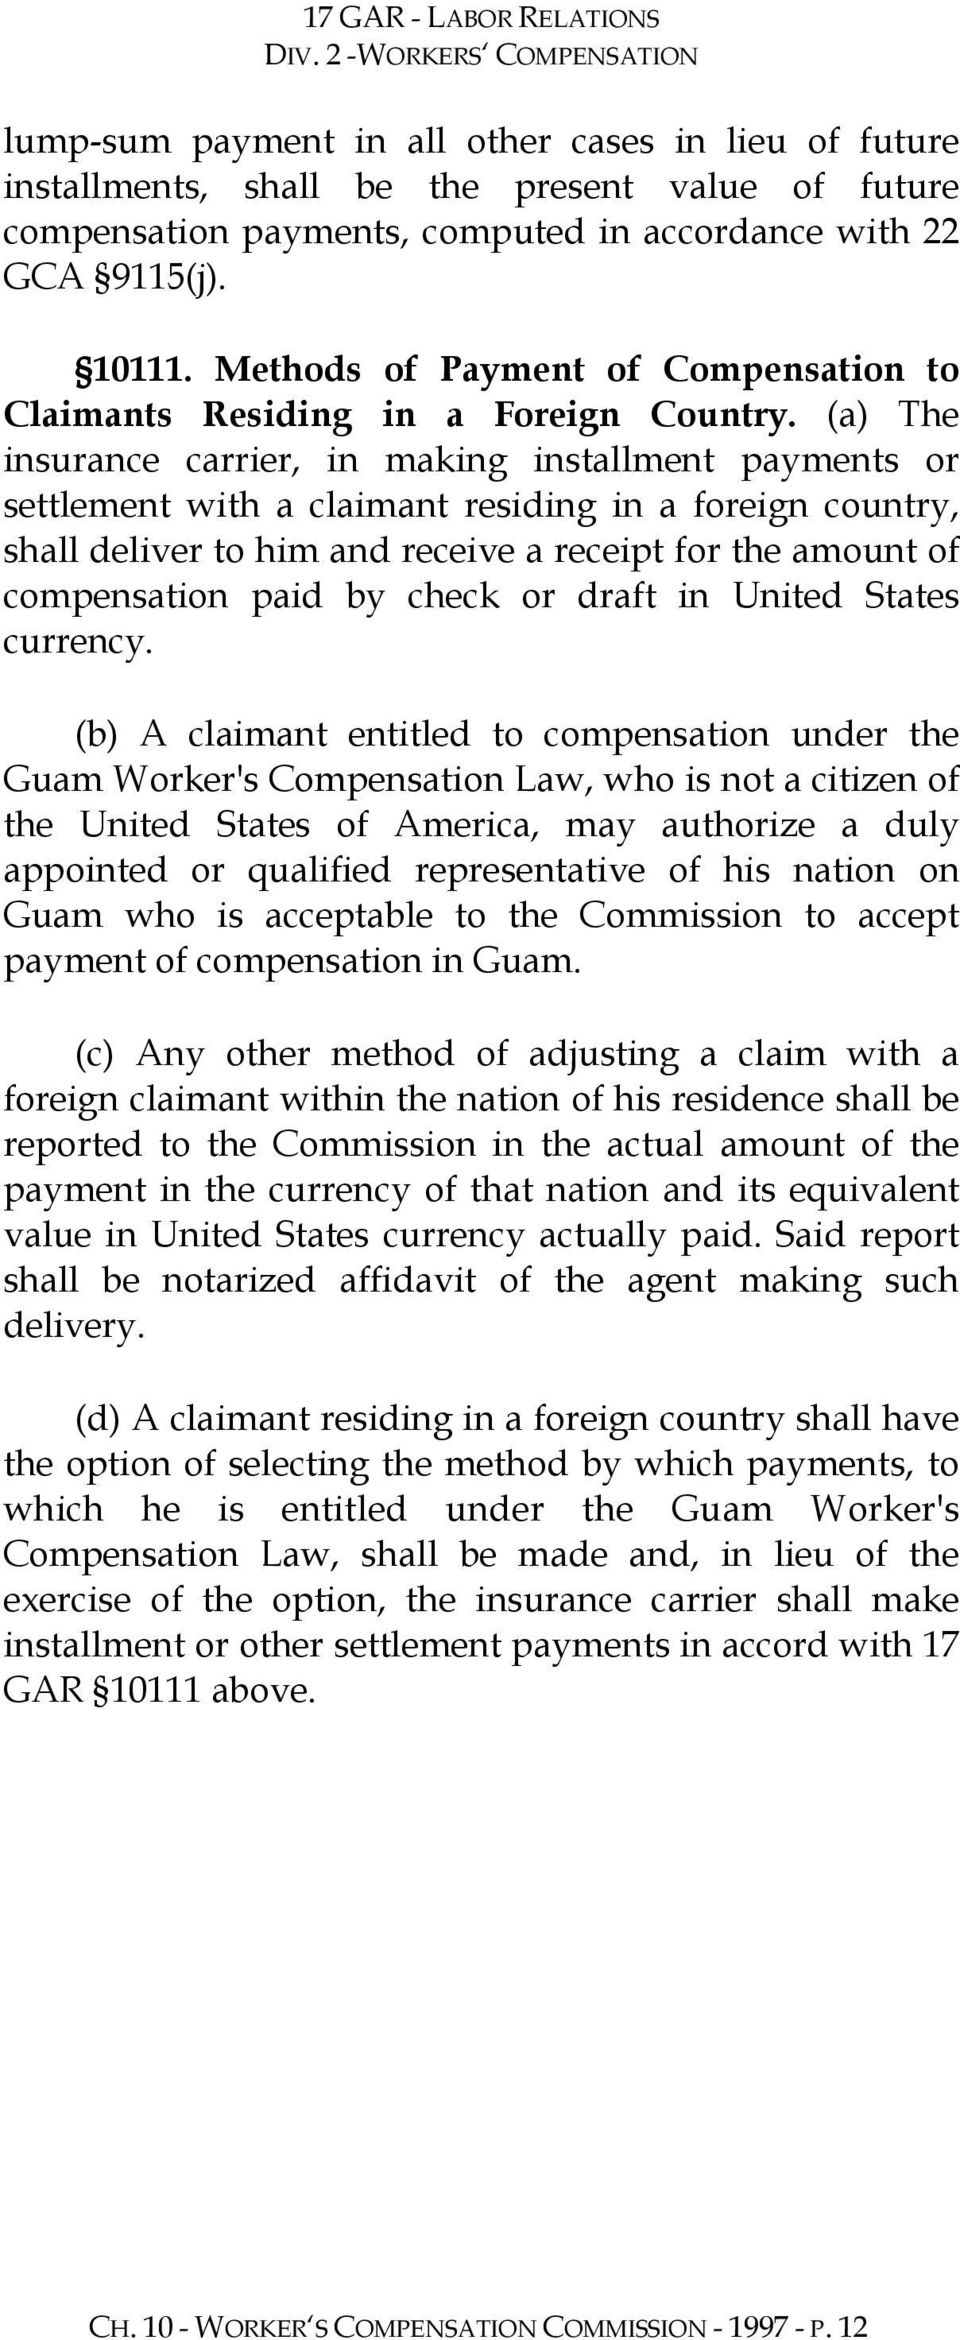 (a) The insurance carrier, in making installment payments or settlement with a claimant residing in a foreign country, shall deliver to him and receive a receipt for the amount of compensation paid